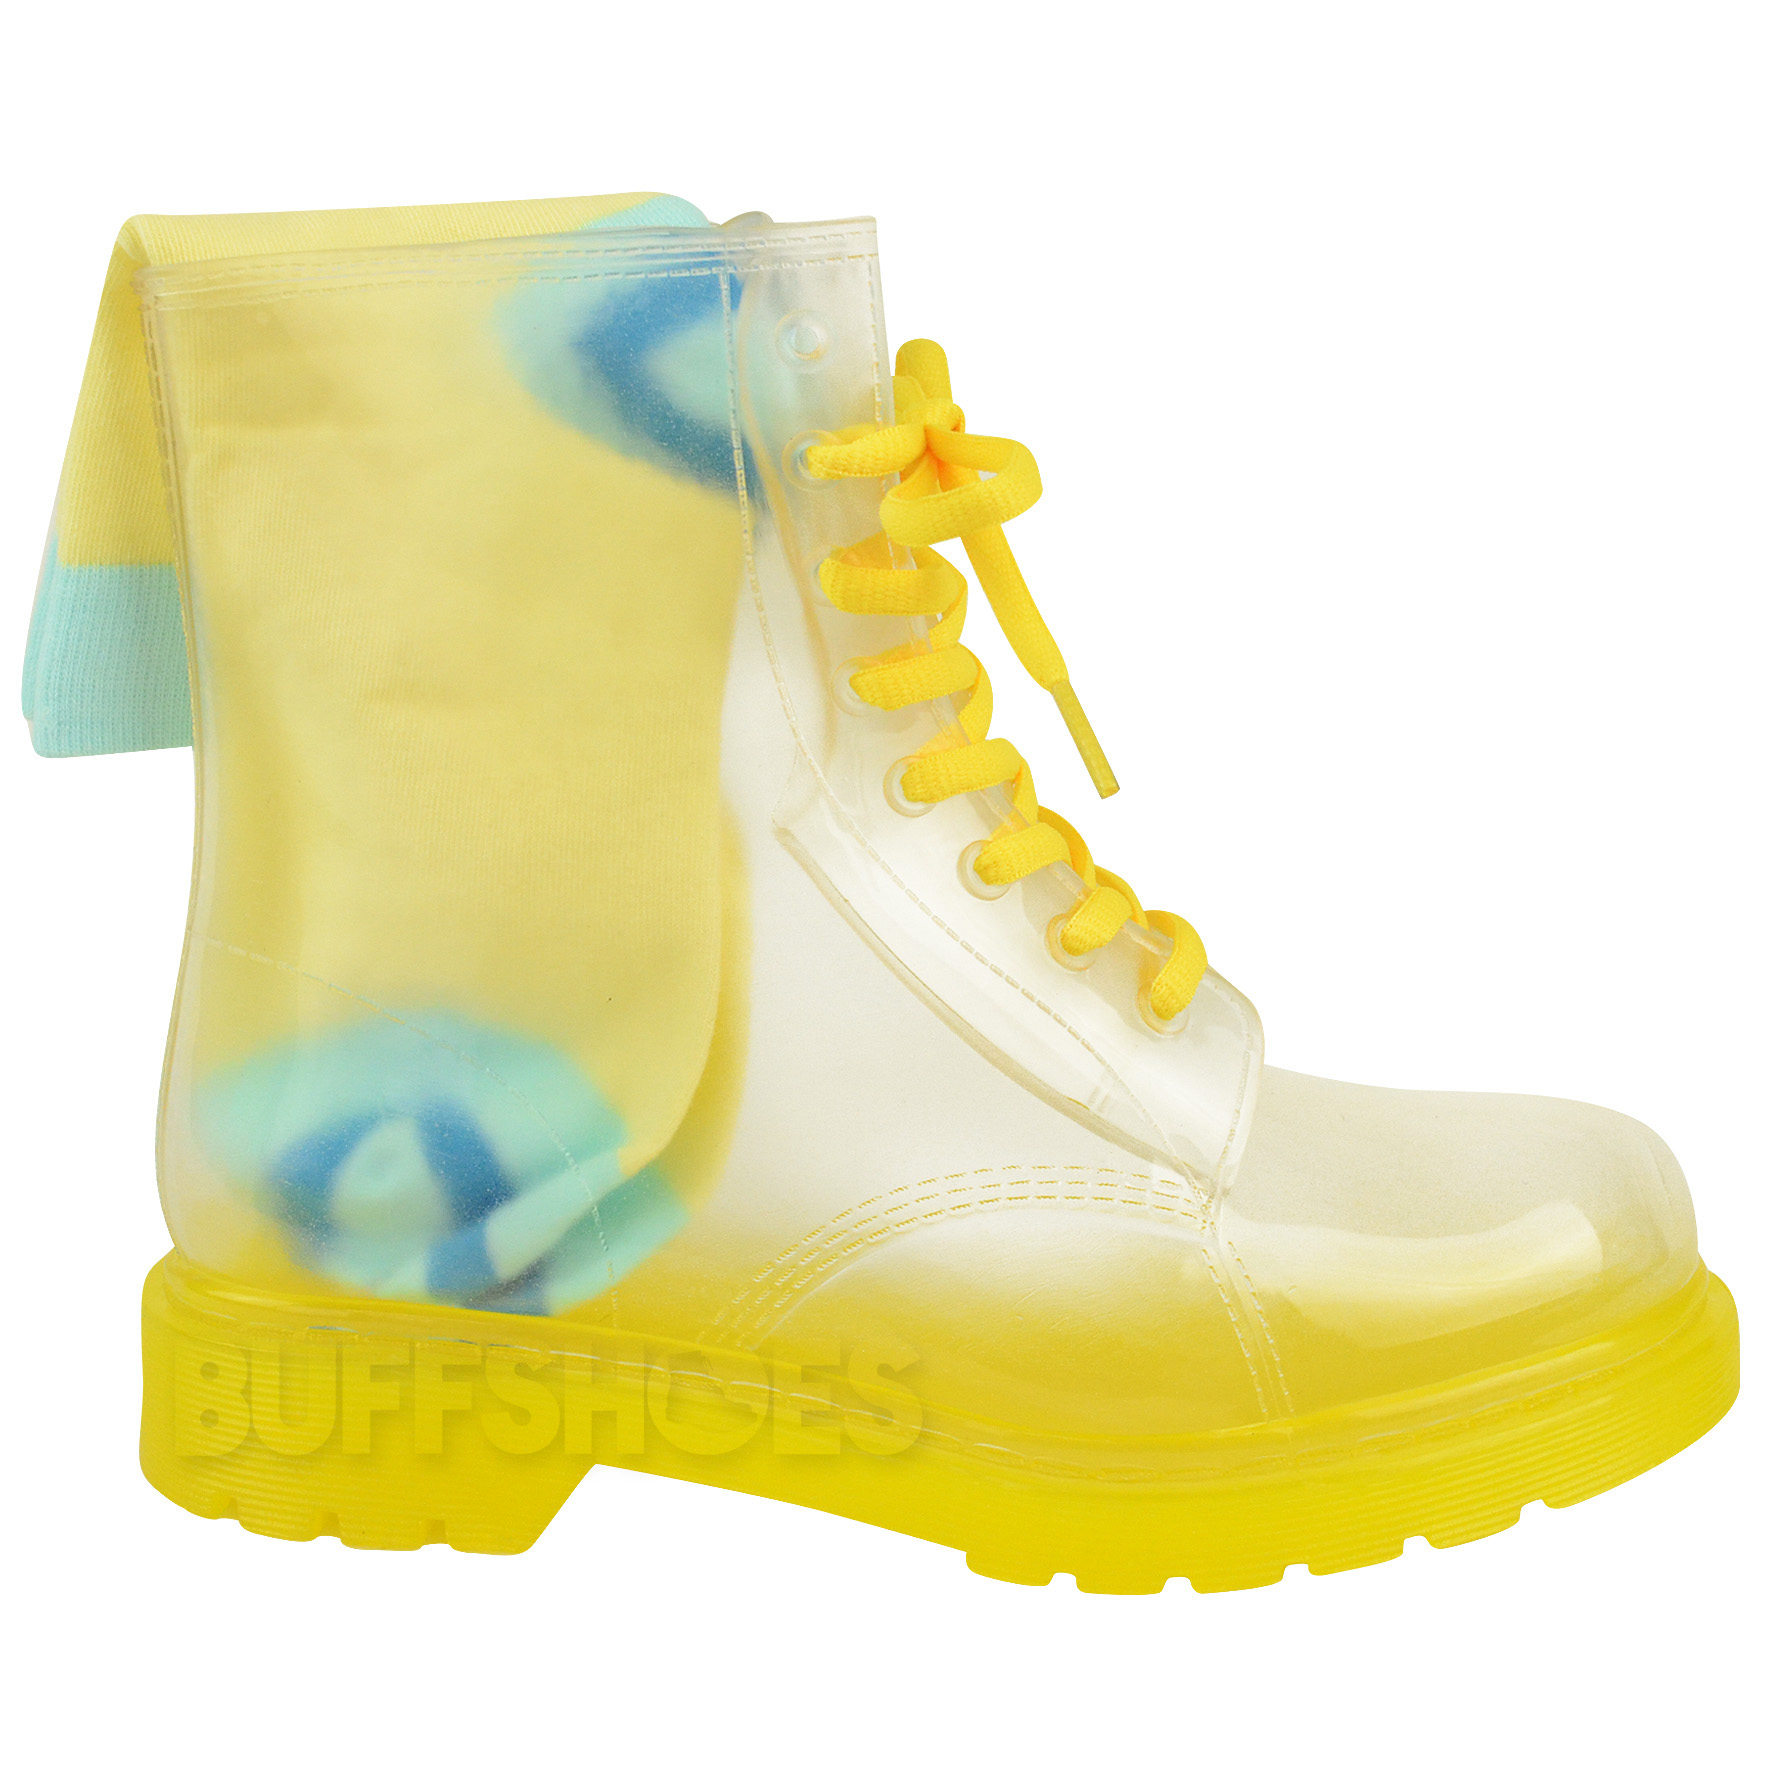 WOMENS LADIES FLAT CLEAR FESTIVAL JELLY WELLIES LOW ANKLE RAIN BOOTS ...